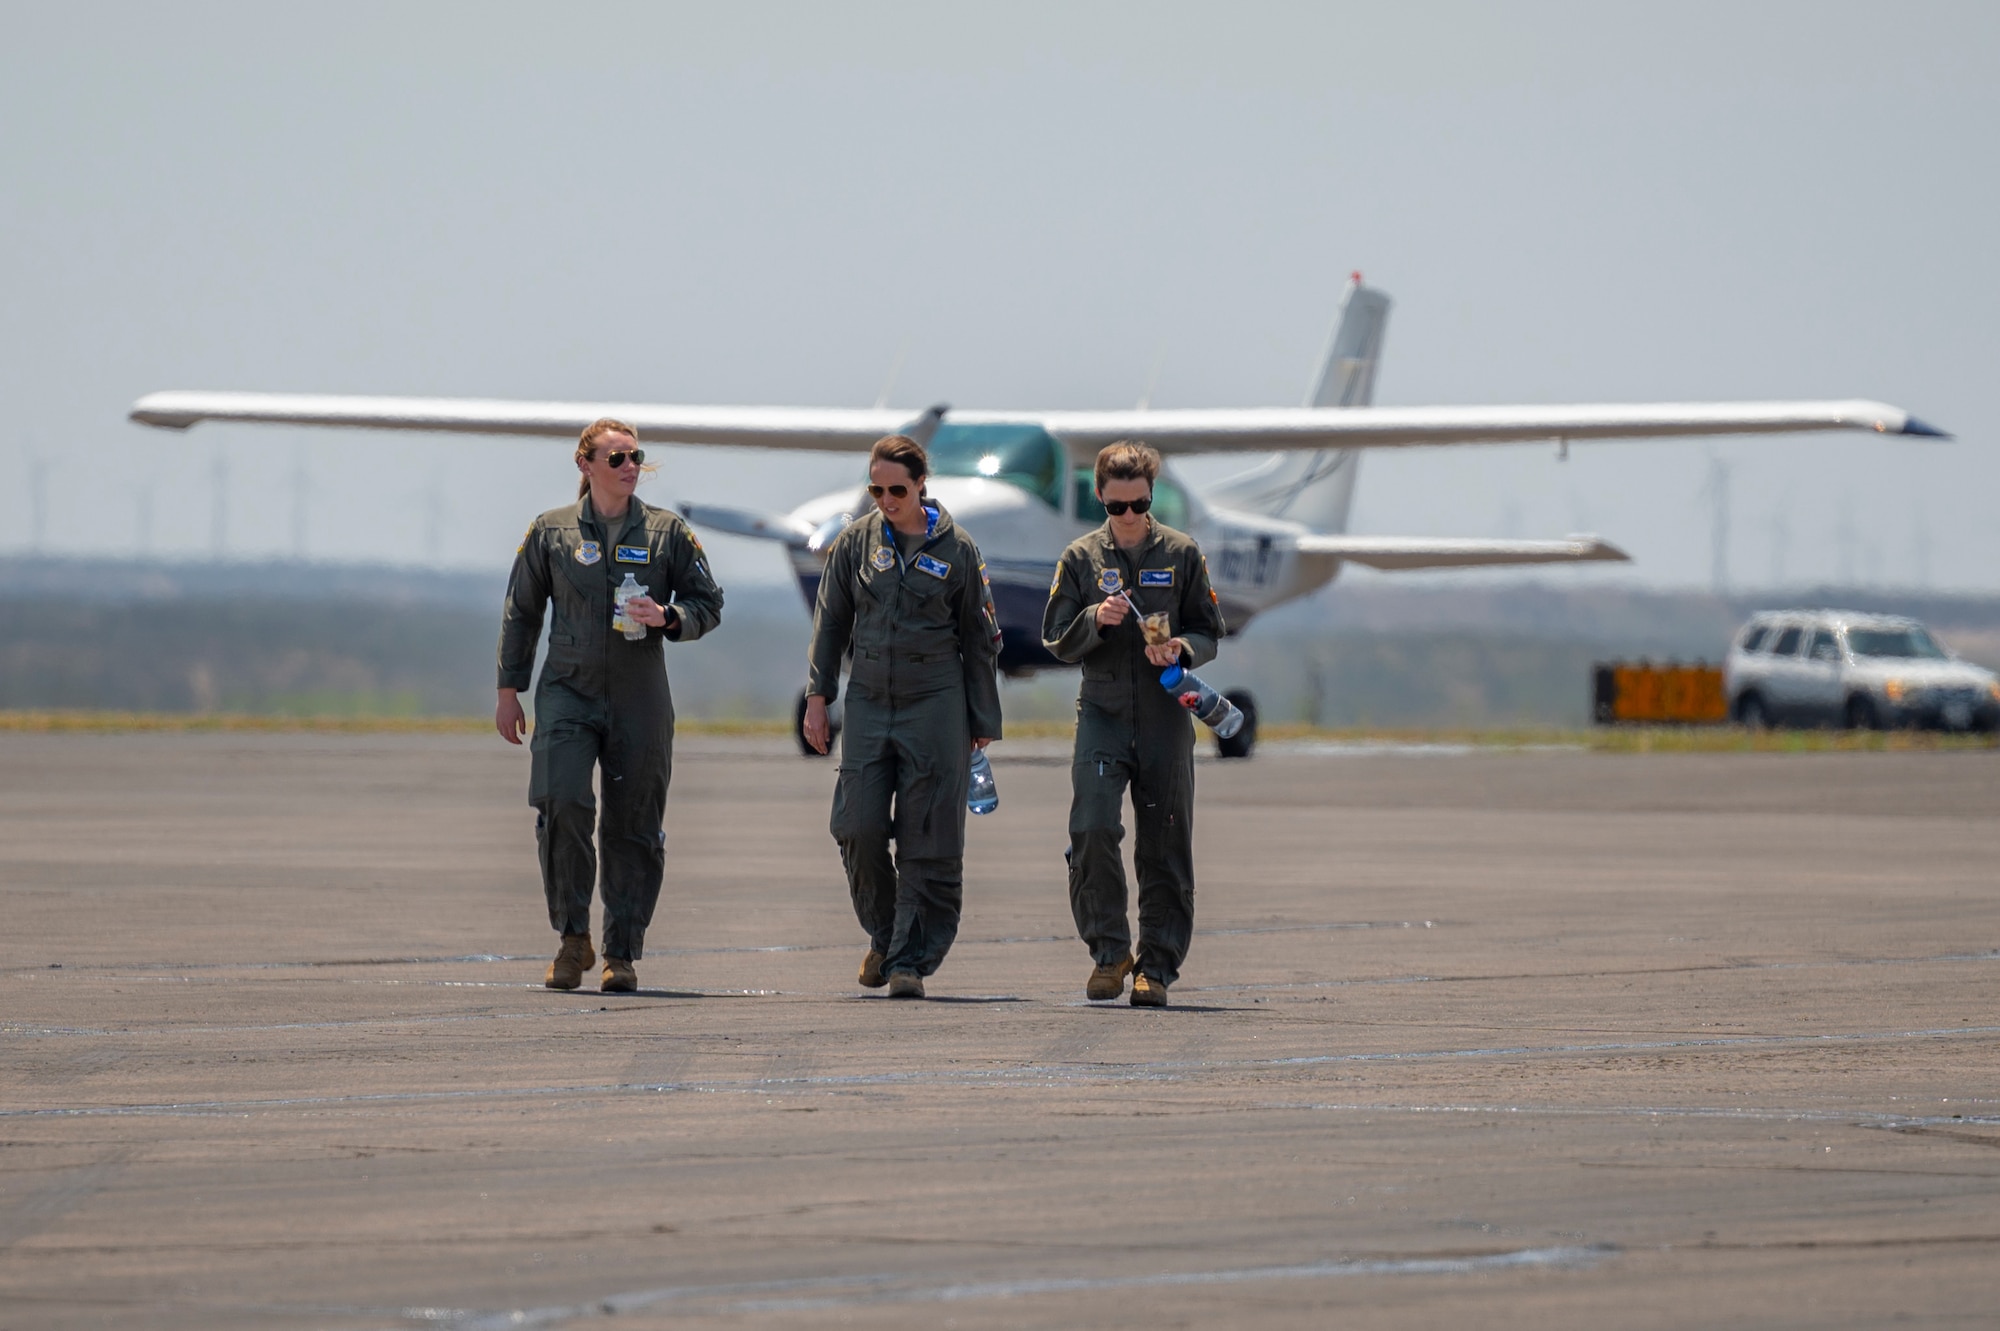 Three pilots from the 40th Airlift Squadron walk to a C-130J Super Hercules on the Avenger Field tarmac in Sweetwater, Texas, during the 80th Women Airforce Service Pilot Homecoming, April 30, 2022. The 80th WASP Homecoming was held in conjunction with the Dyess Women’s Summit in honor of the WASP program and to teach attendees about the contributions women have made to the U.S. military. (U.S. Air Force photo by Senior Airman Reilly McGuire)